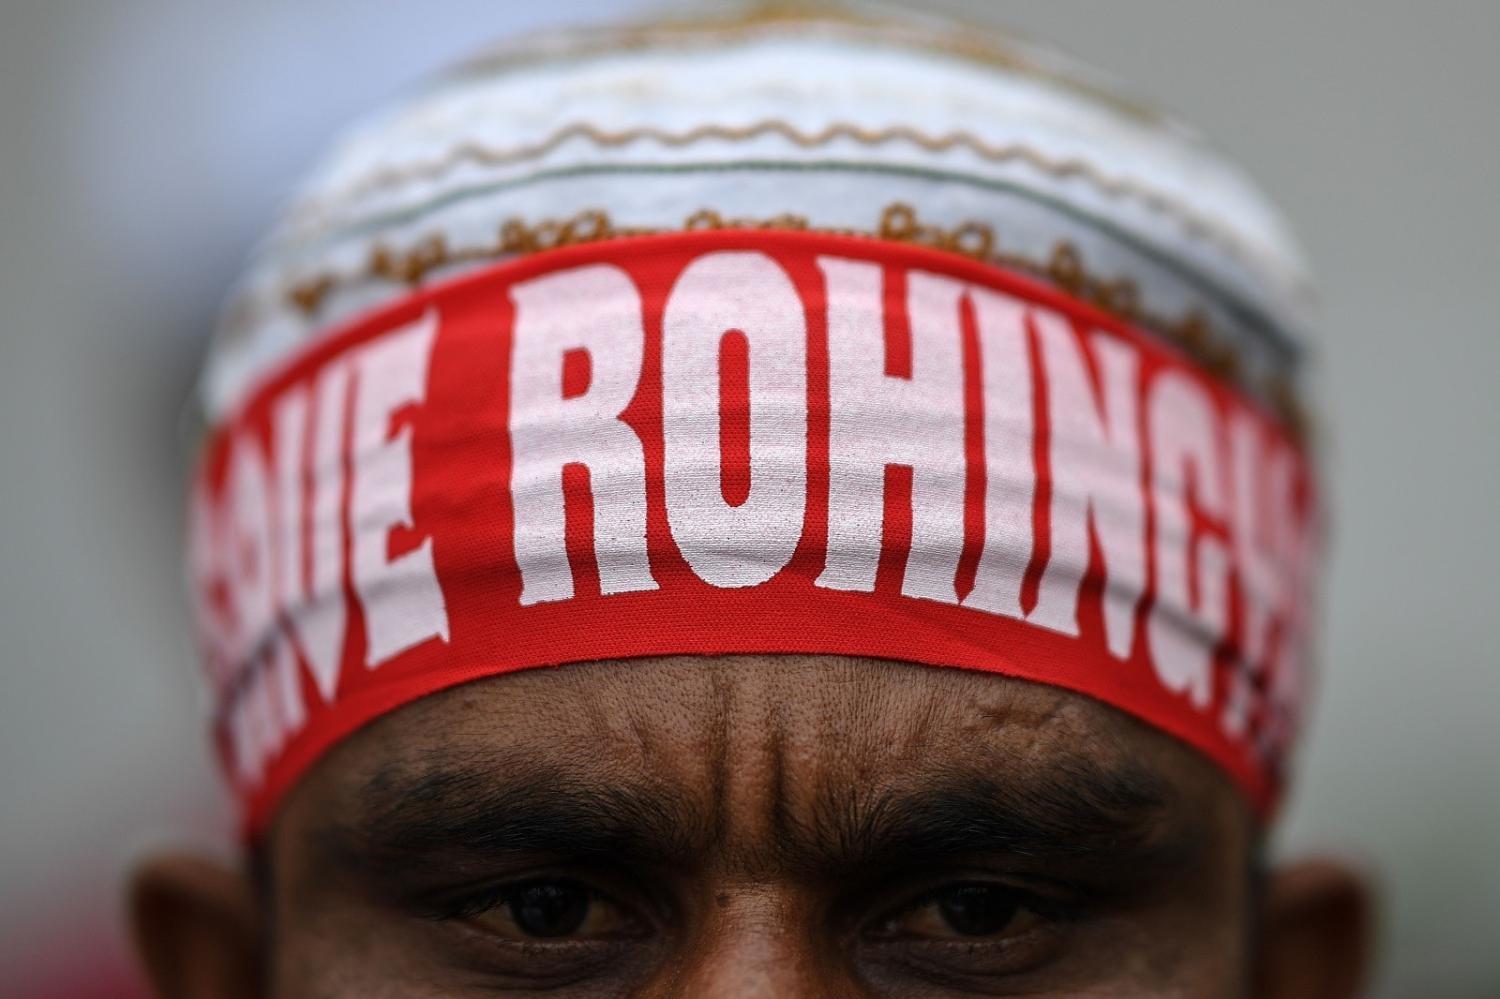 A Rohingya refugee living in Malaysia wears a headband reading "Save Rohingya" during a protest in Kuala Lumpur in 2017 (Mohd Rasfan/AFP via Getty Images)